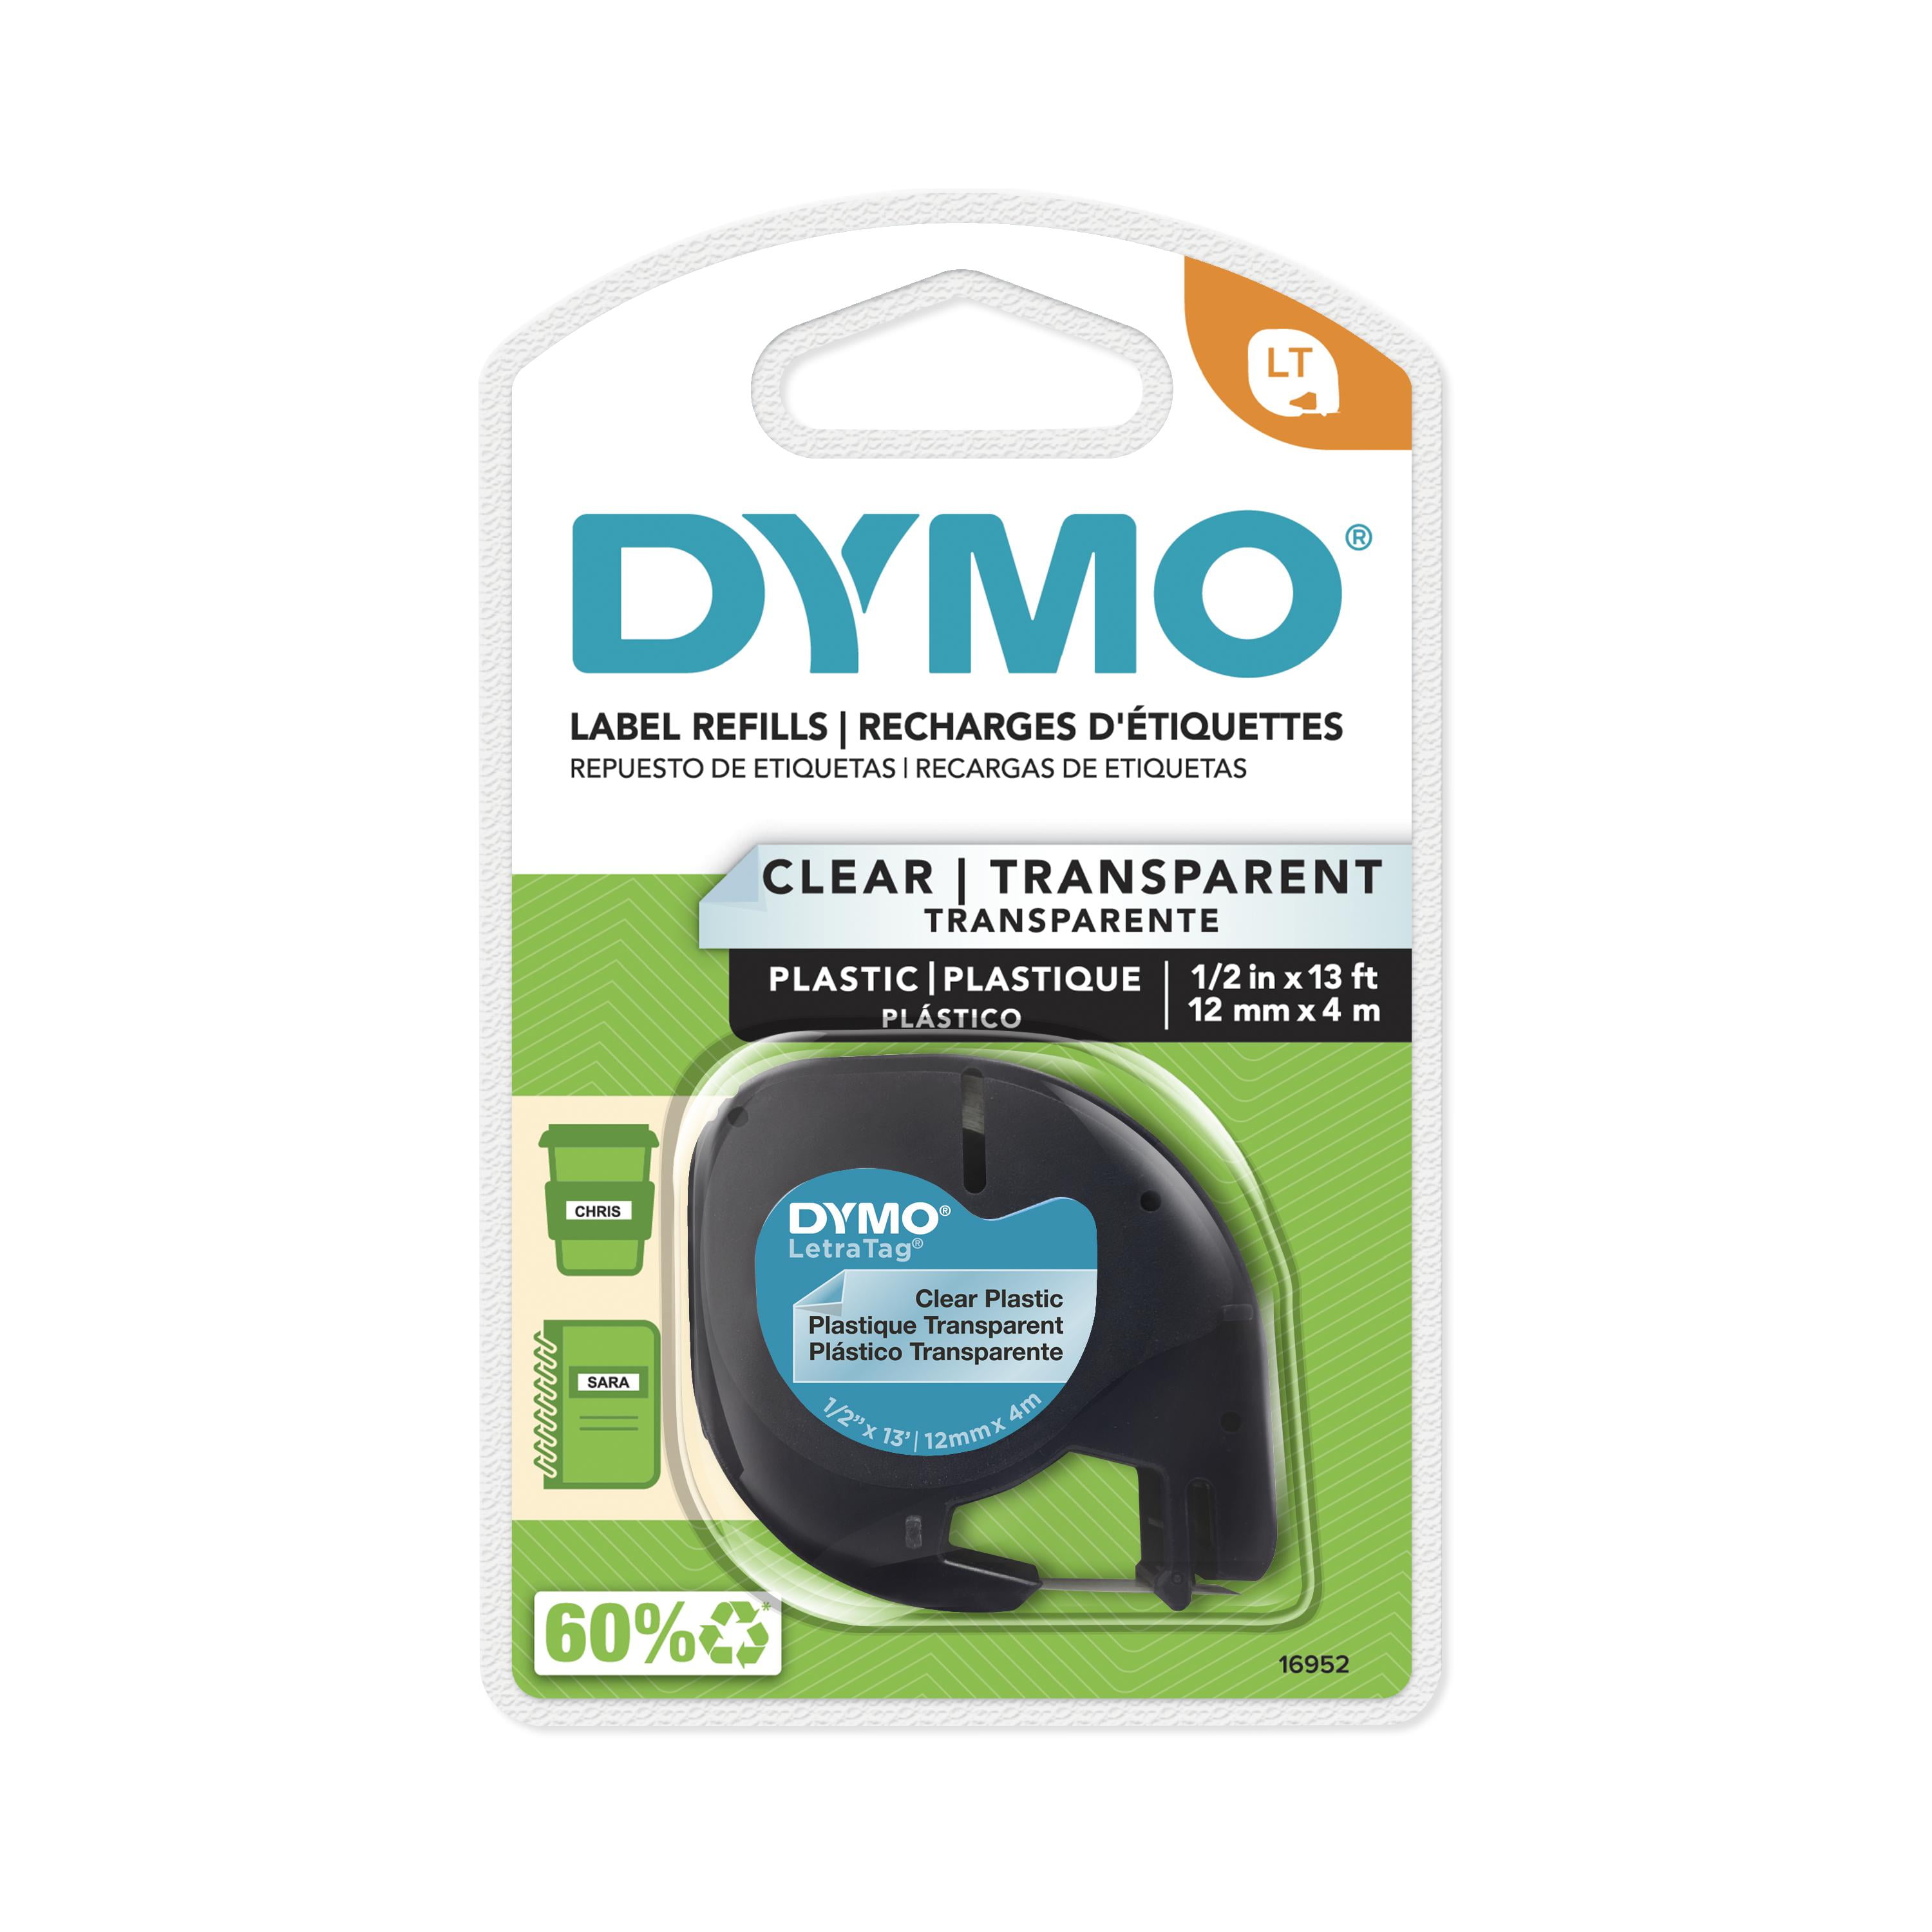 How to refill dymo label maker - synergyfalas